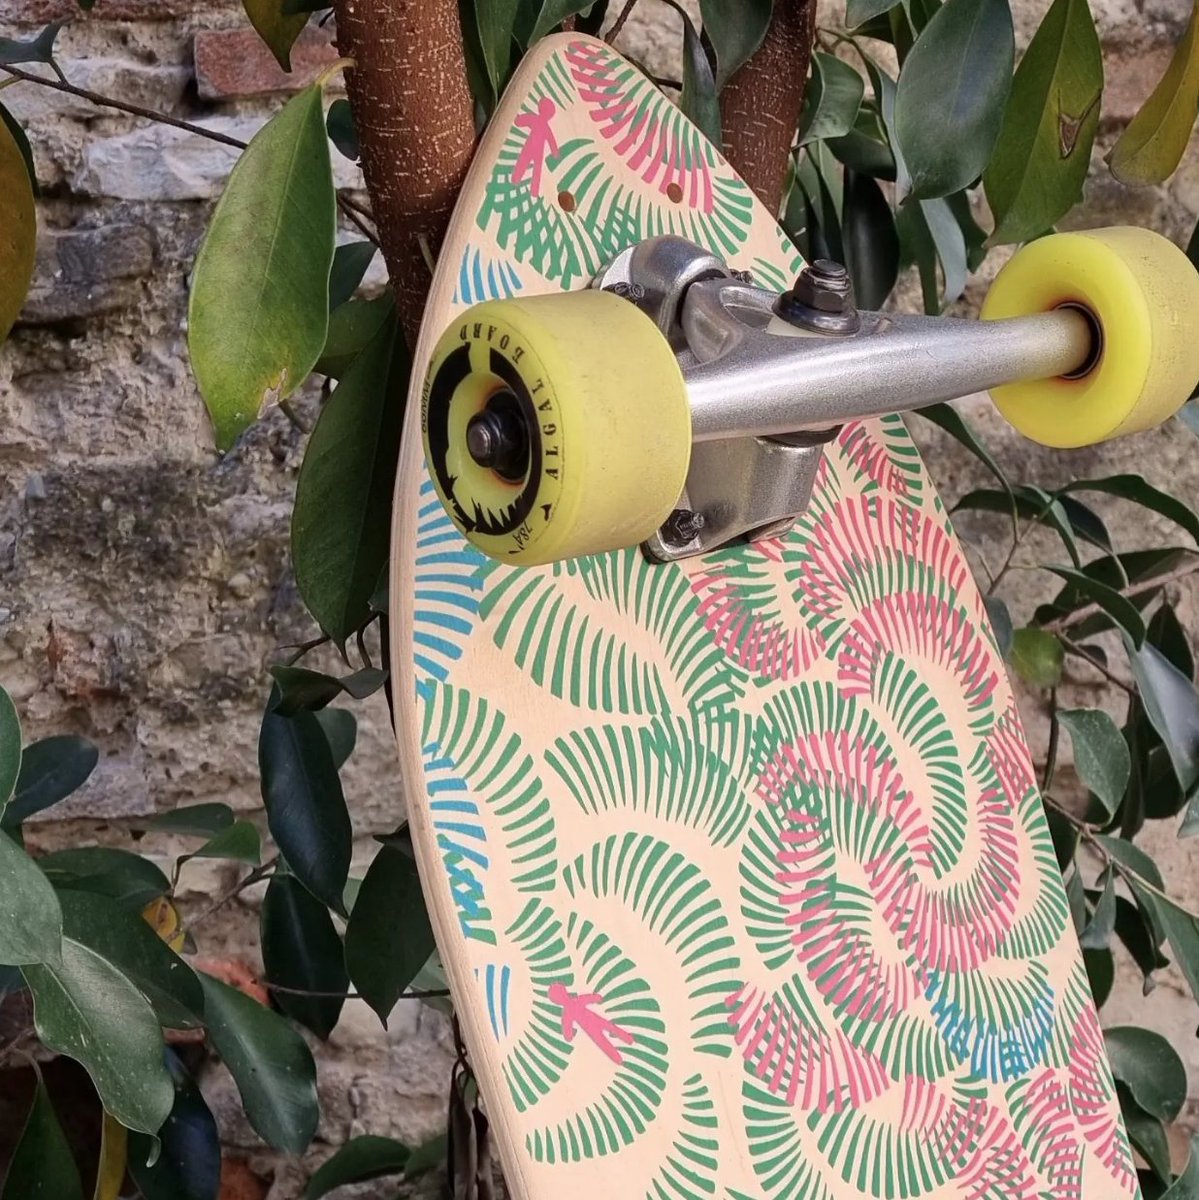 Capture the energy of the street beneath your wheels, with a unique style.

#Skateboarding #ExpressYourself #riccardoramistudio #rrs #riccardorami #skate #wave #pink #green #skateboard #style #unique